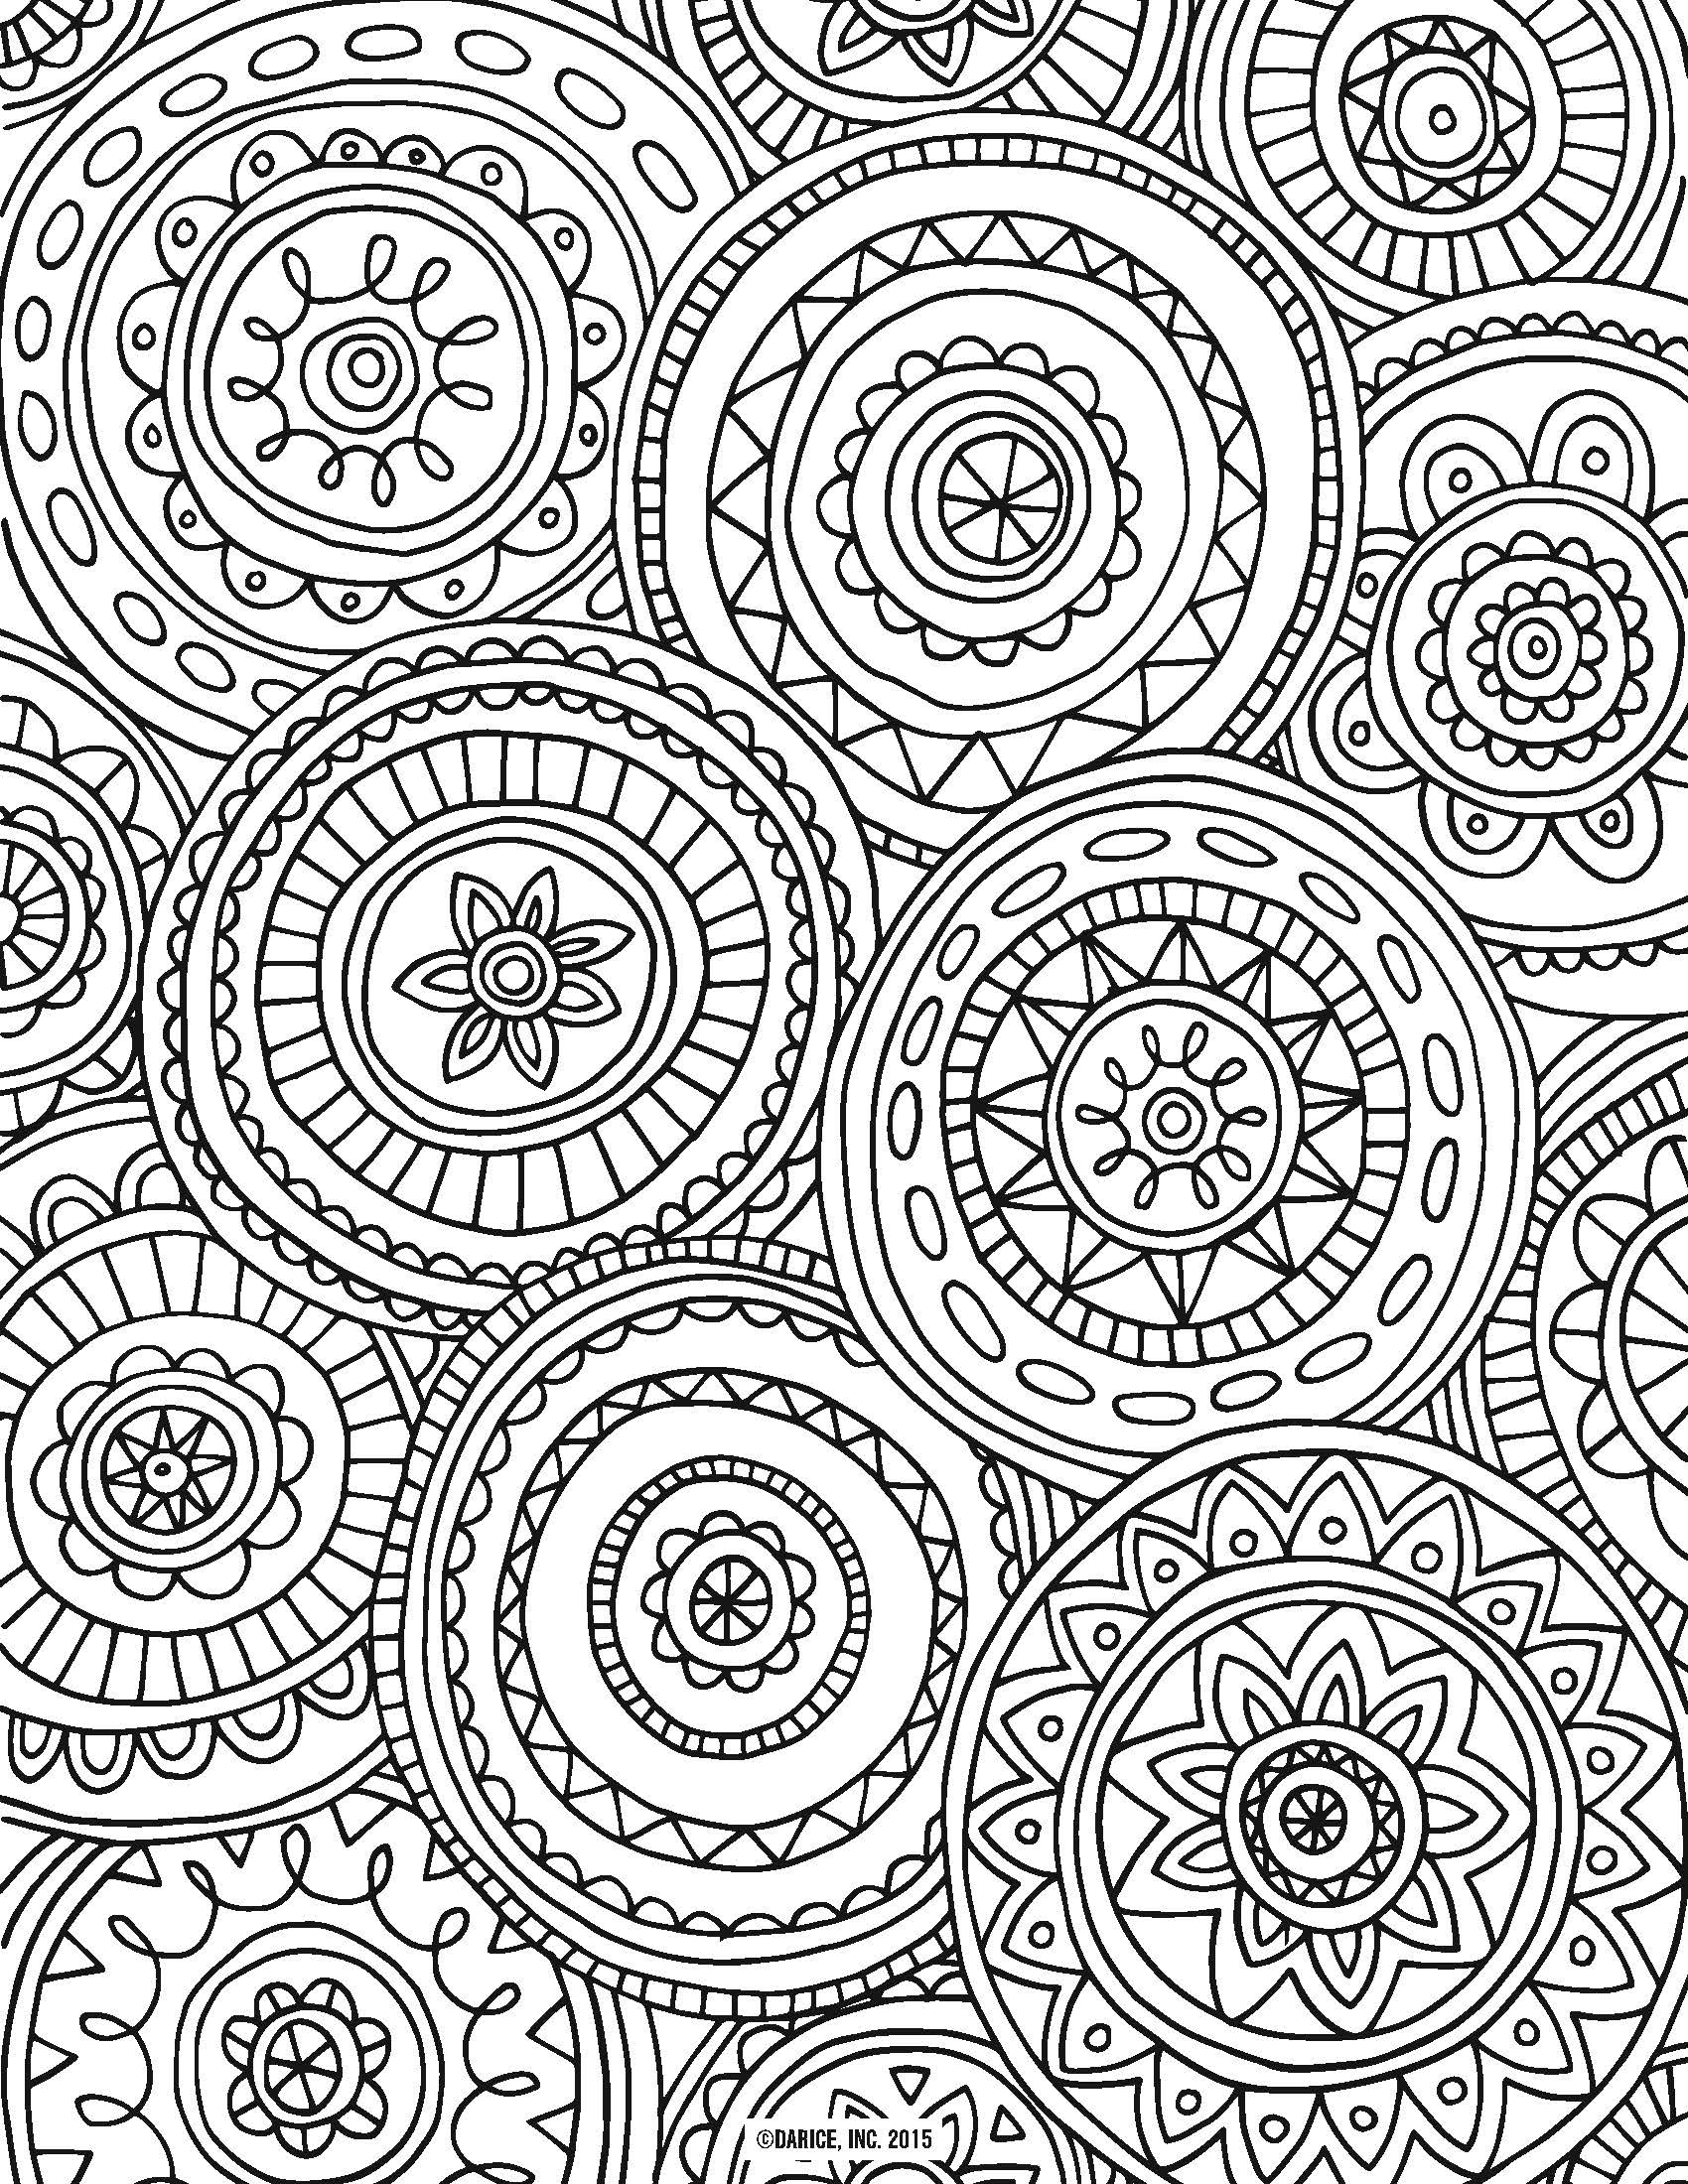 9 Free Printable Adult Coloring Pages | Pat Catan's Blog - Free Printable Coloring Pages For Adults Only